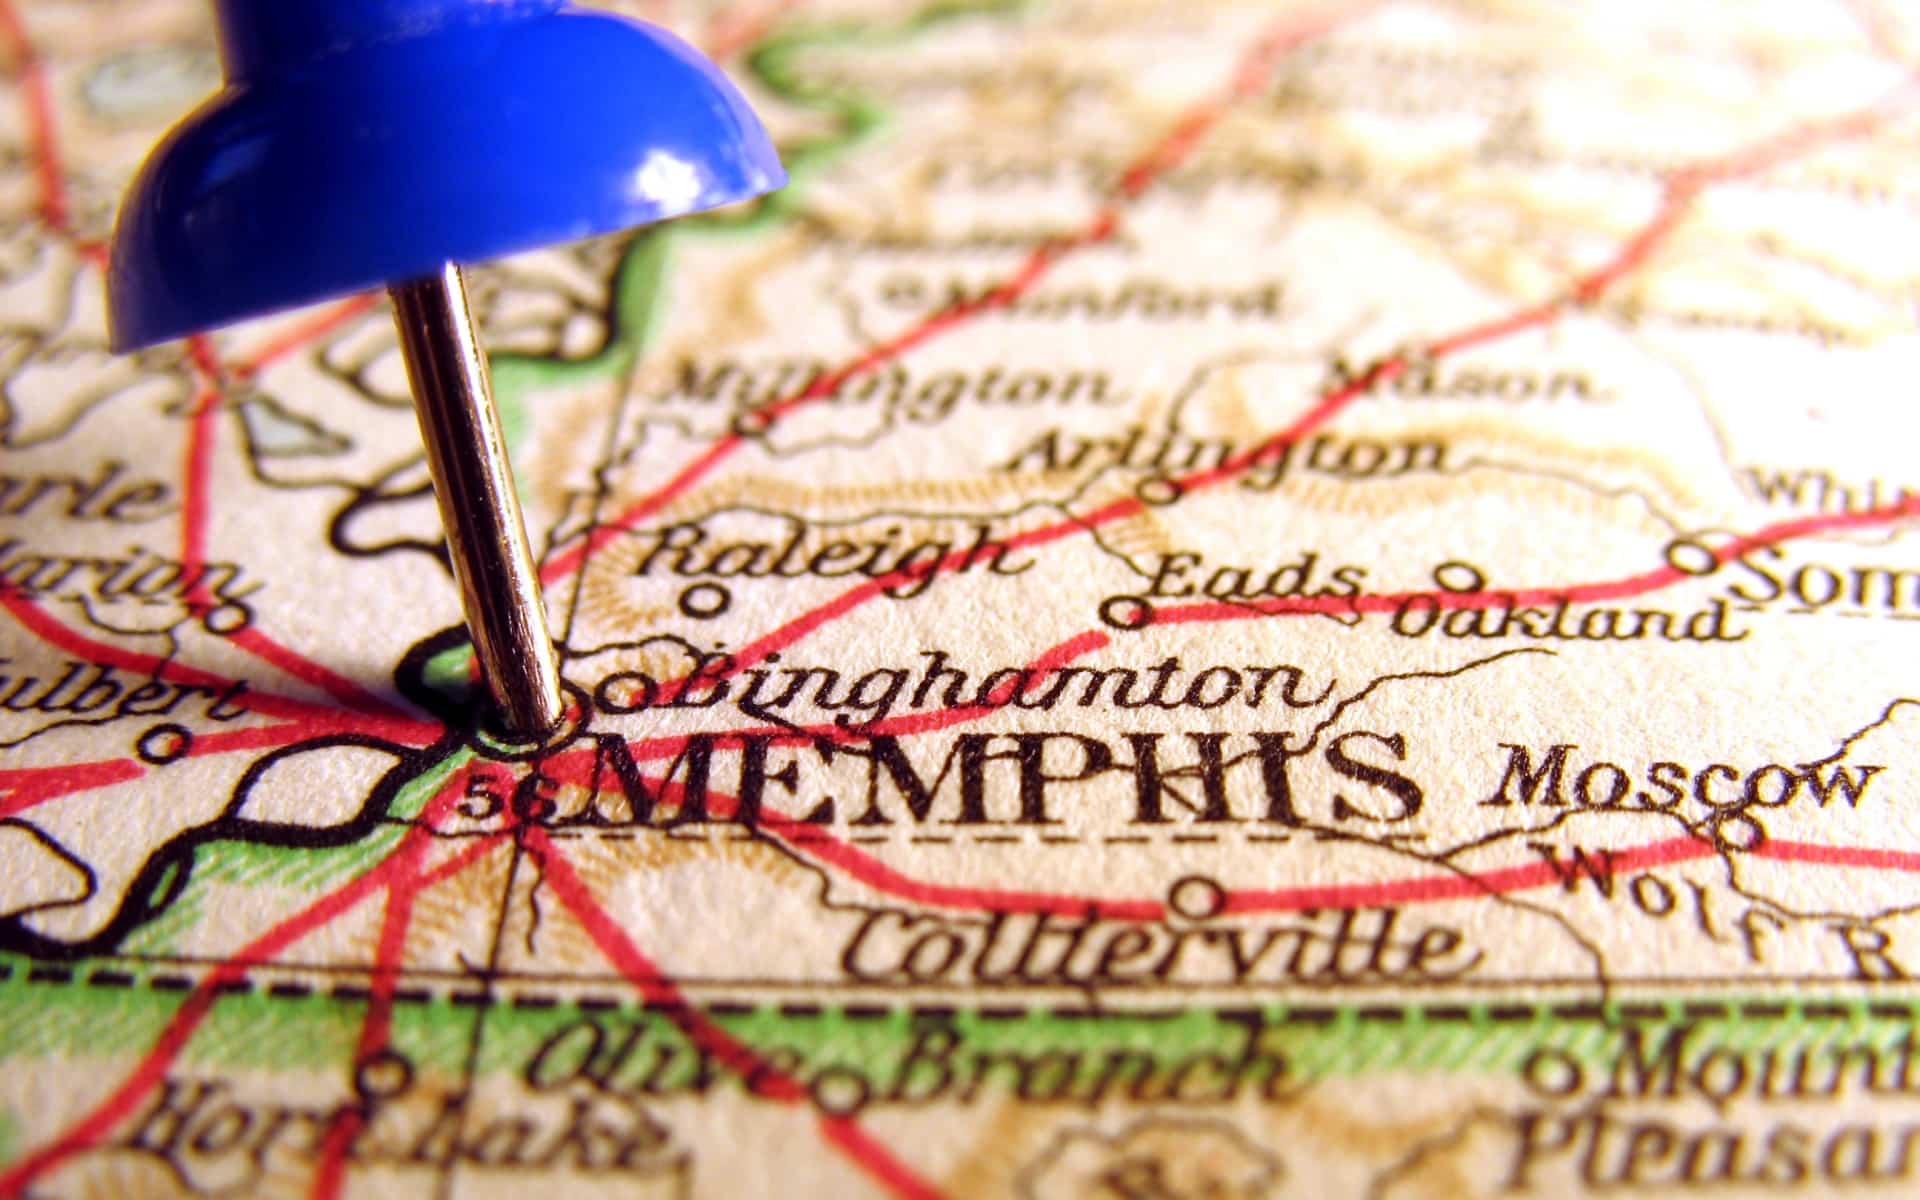 TripSavvy picks Memphis as the best overall destination for 2019!